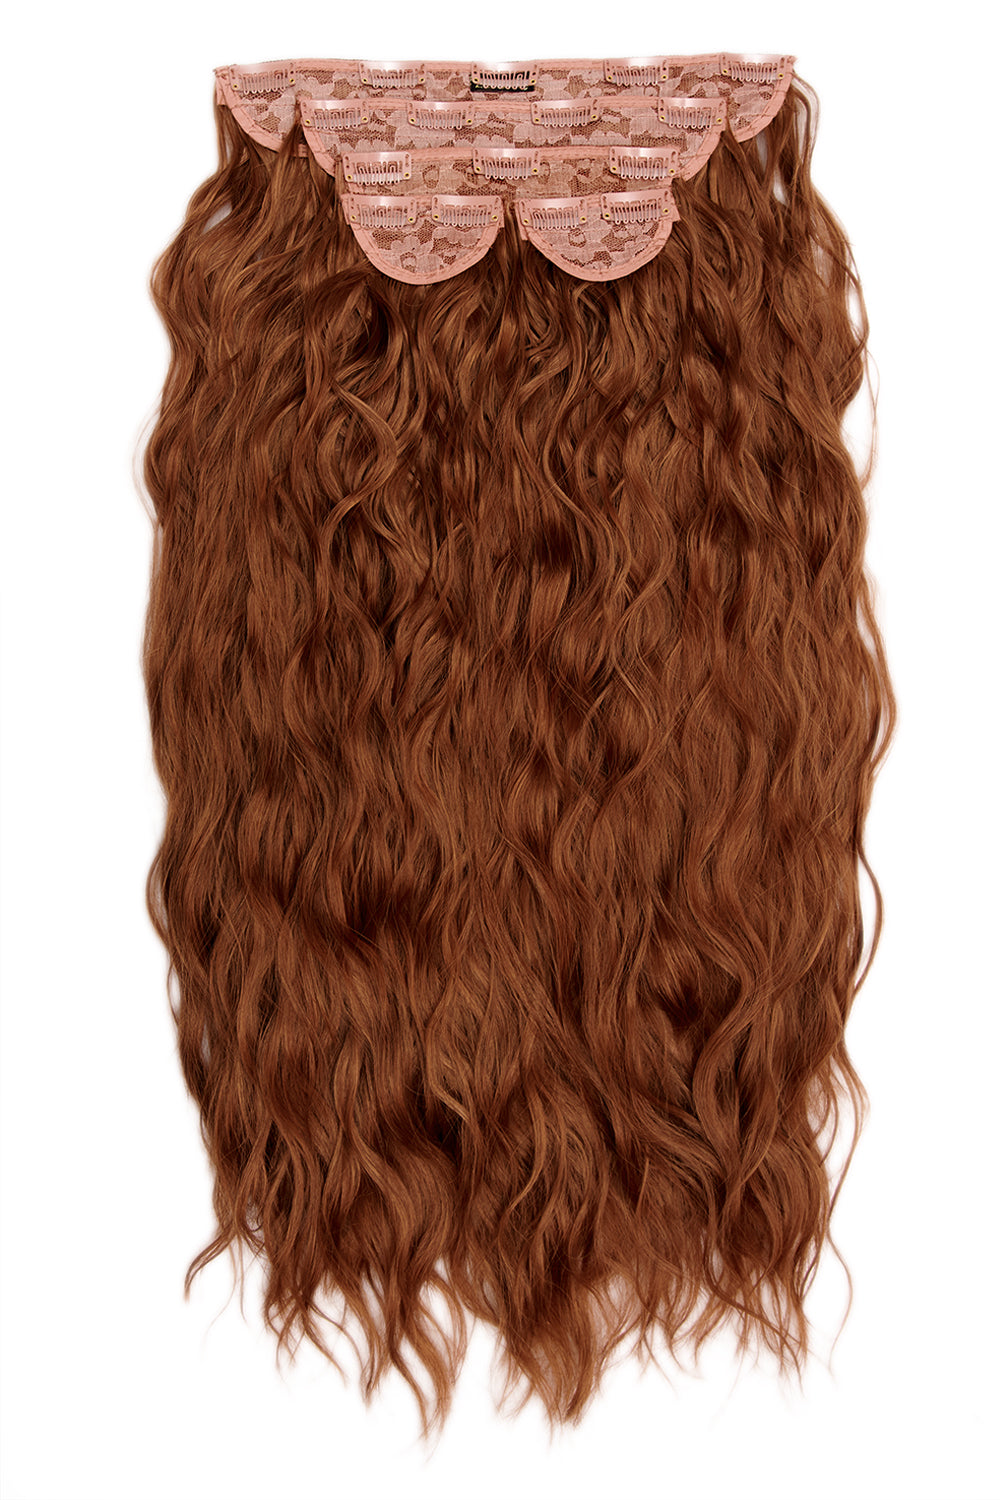 Super Thick 26" 5 Piece Waist Length Wave Clip In Hair Extensions - LullaBellz  - Copper Red Festival Hair Inspiration